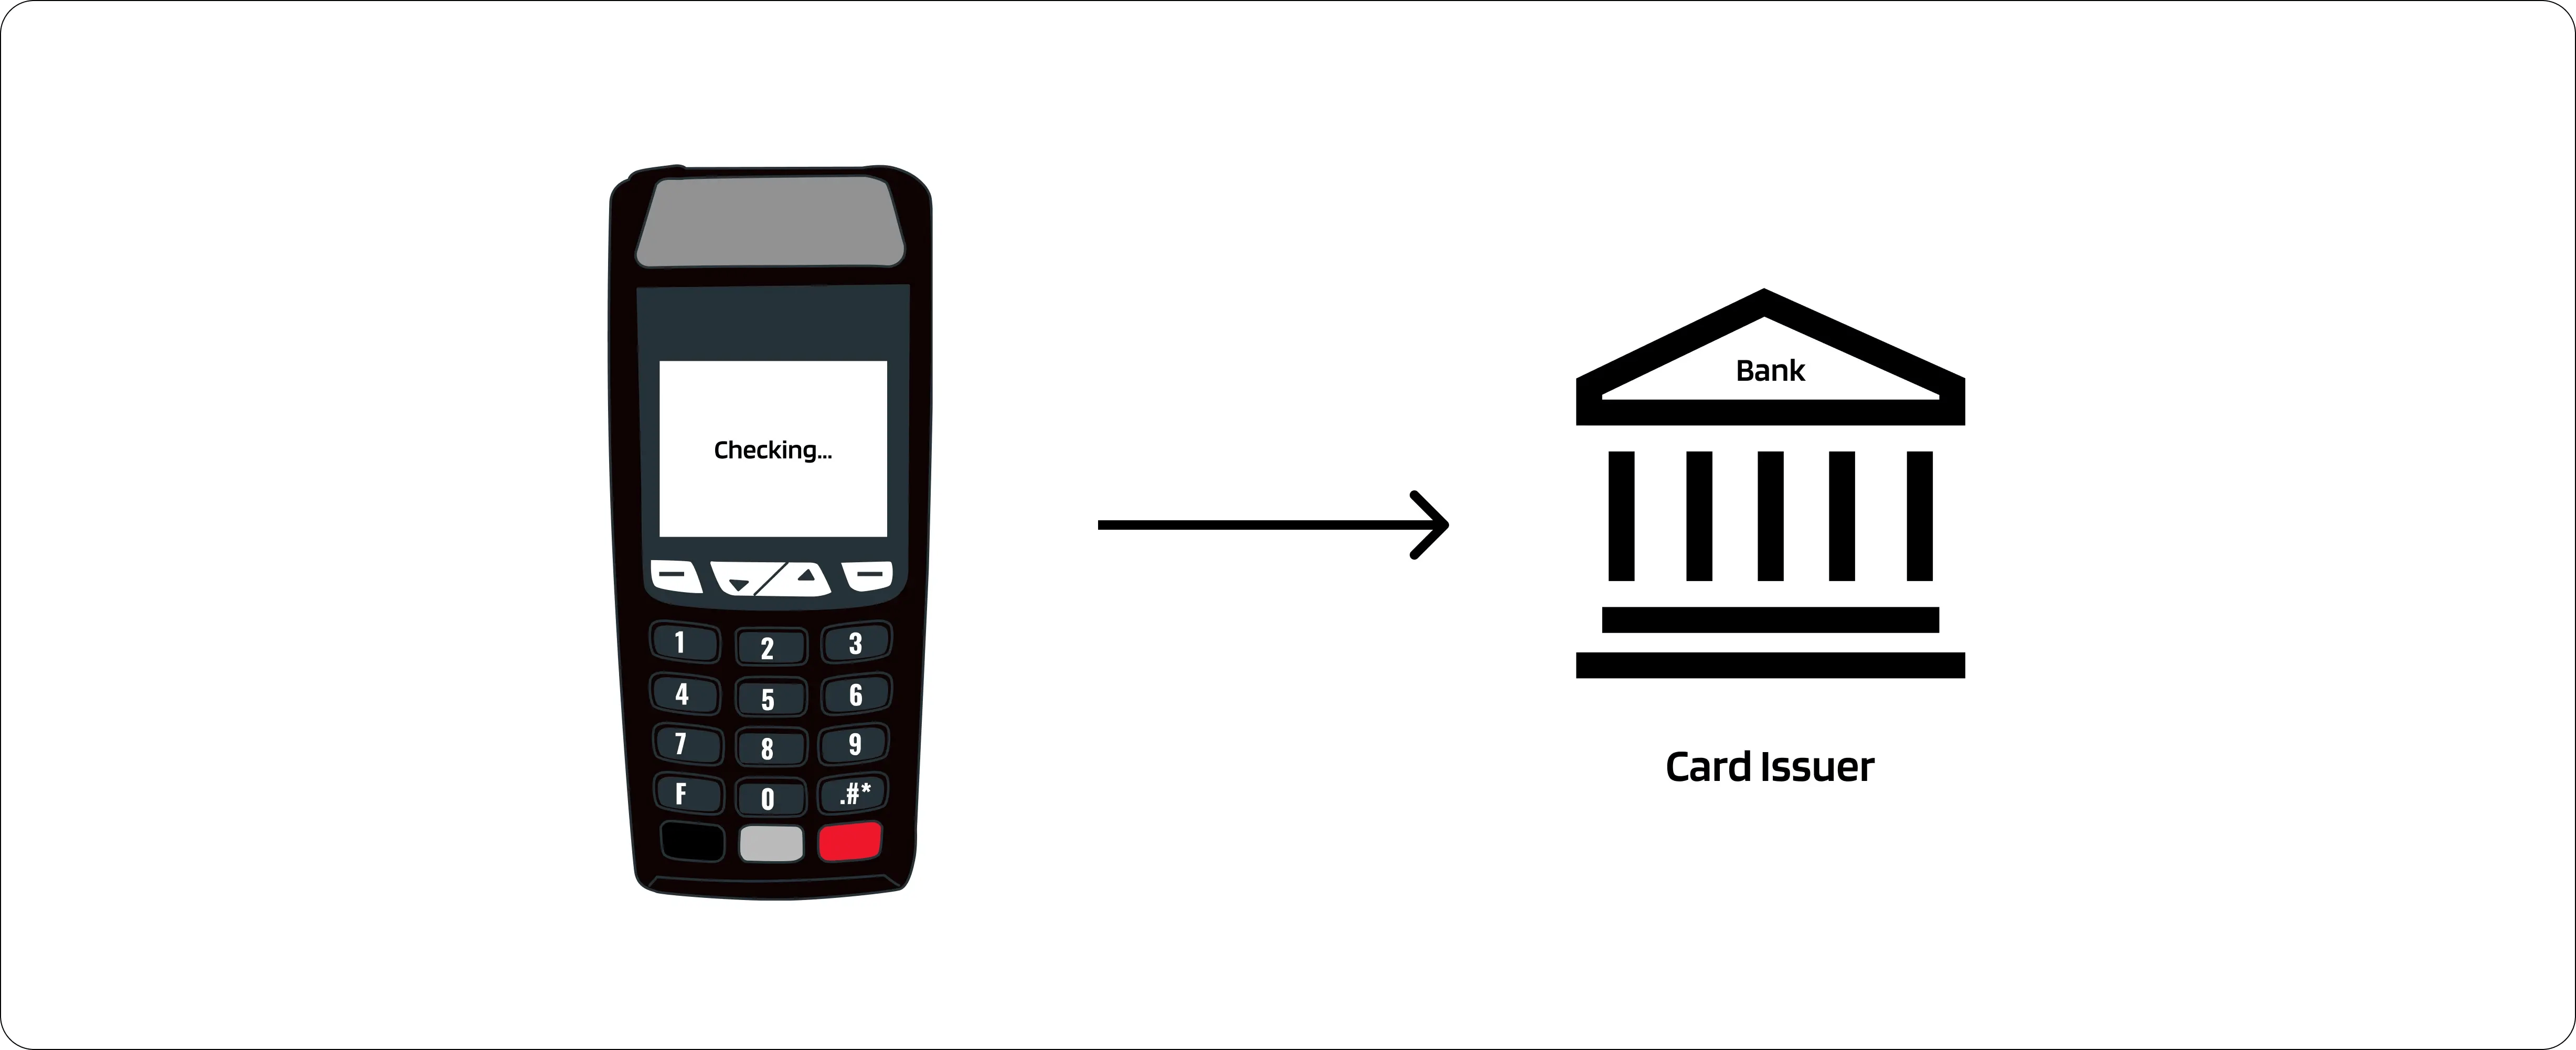 payment terminal makes a payment request to the bank or financial institution that issued the card.